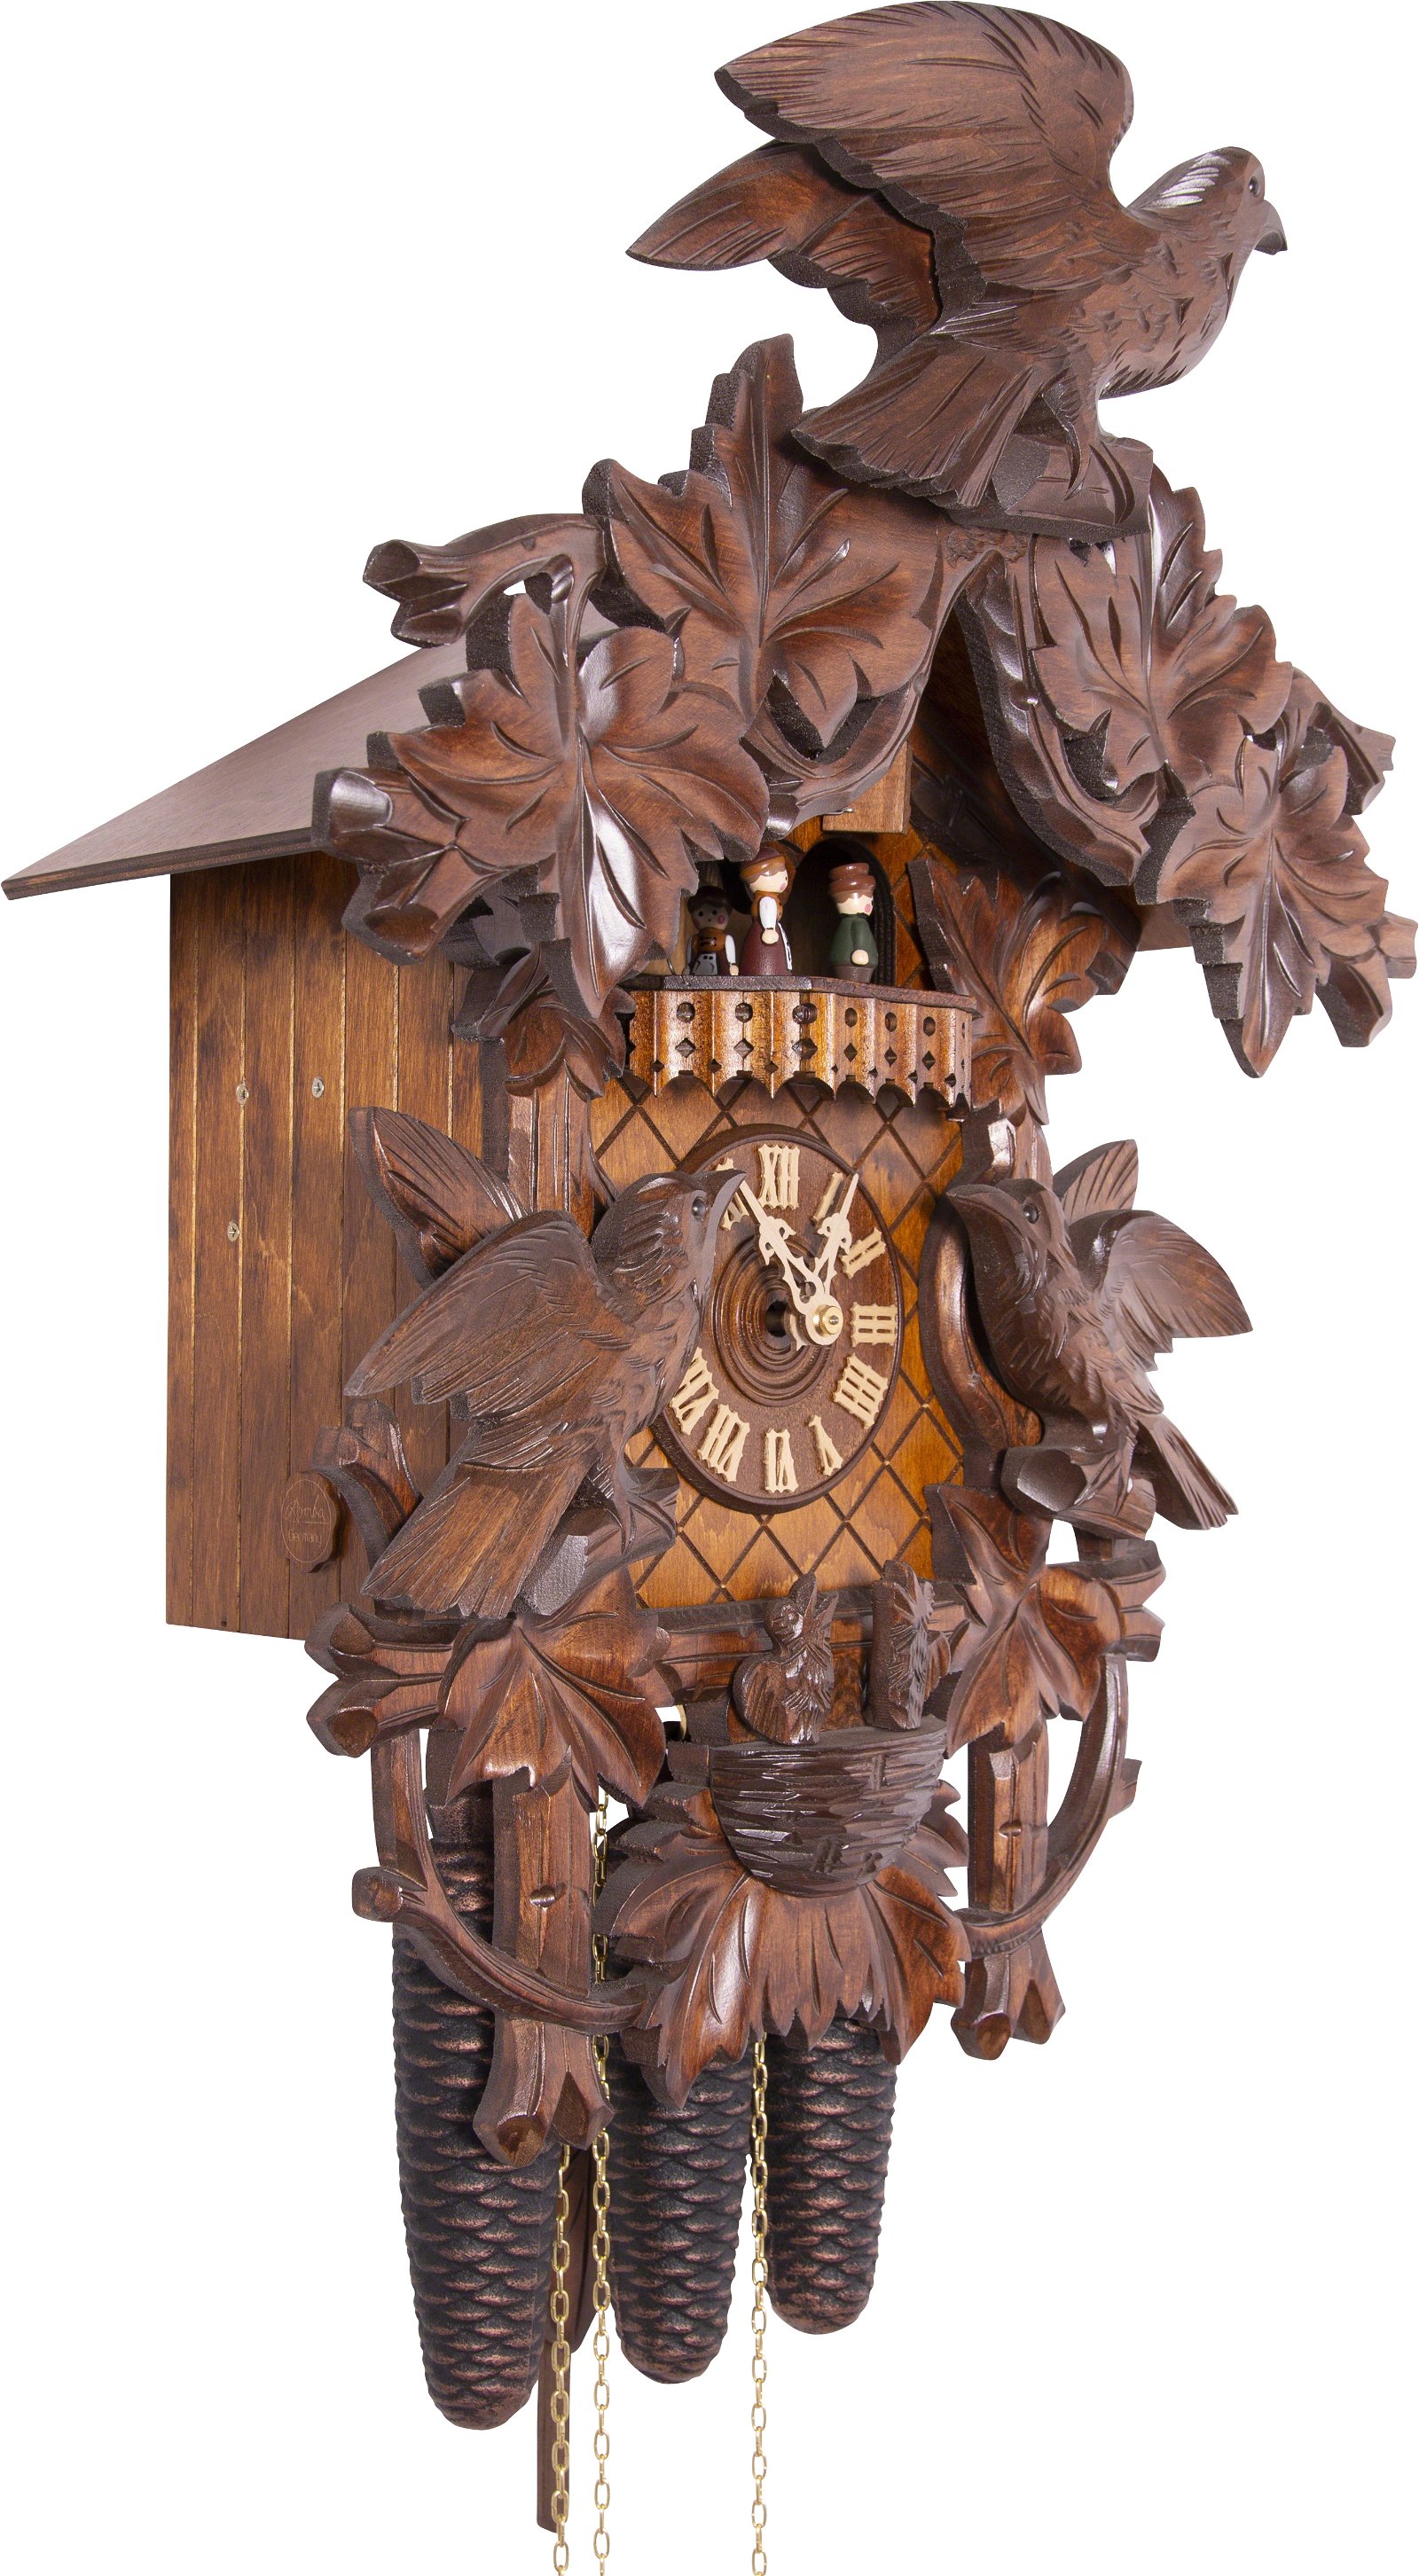 Cuckoo Clock Carved Style 8 Day Movement 52cm by Rombach & Haas